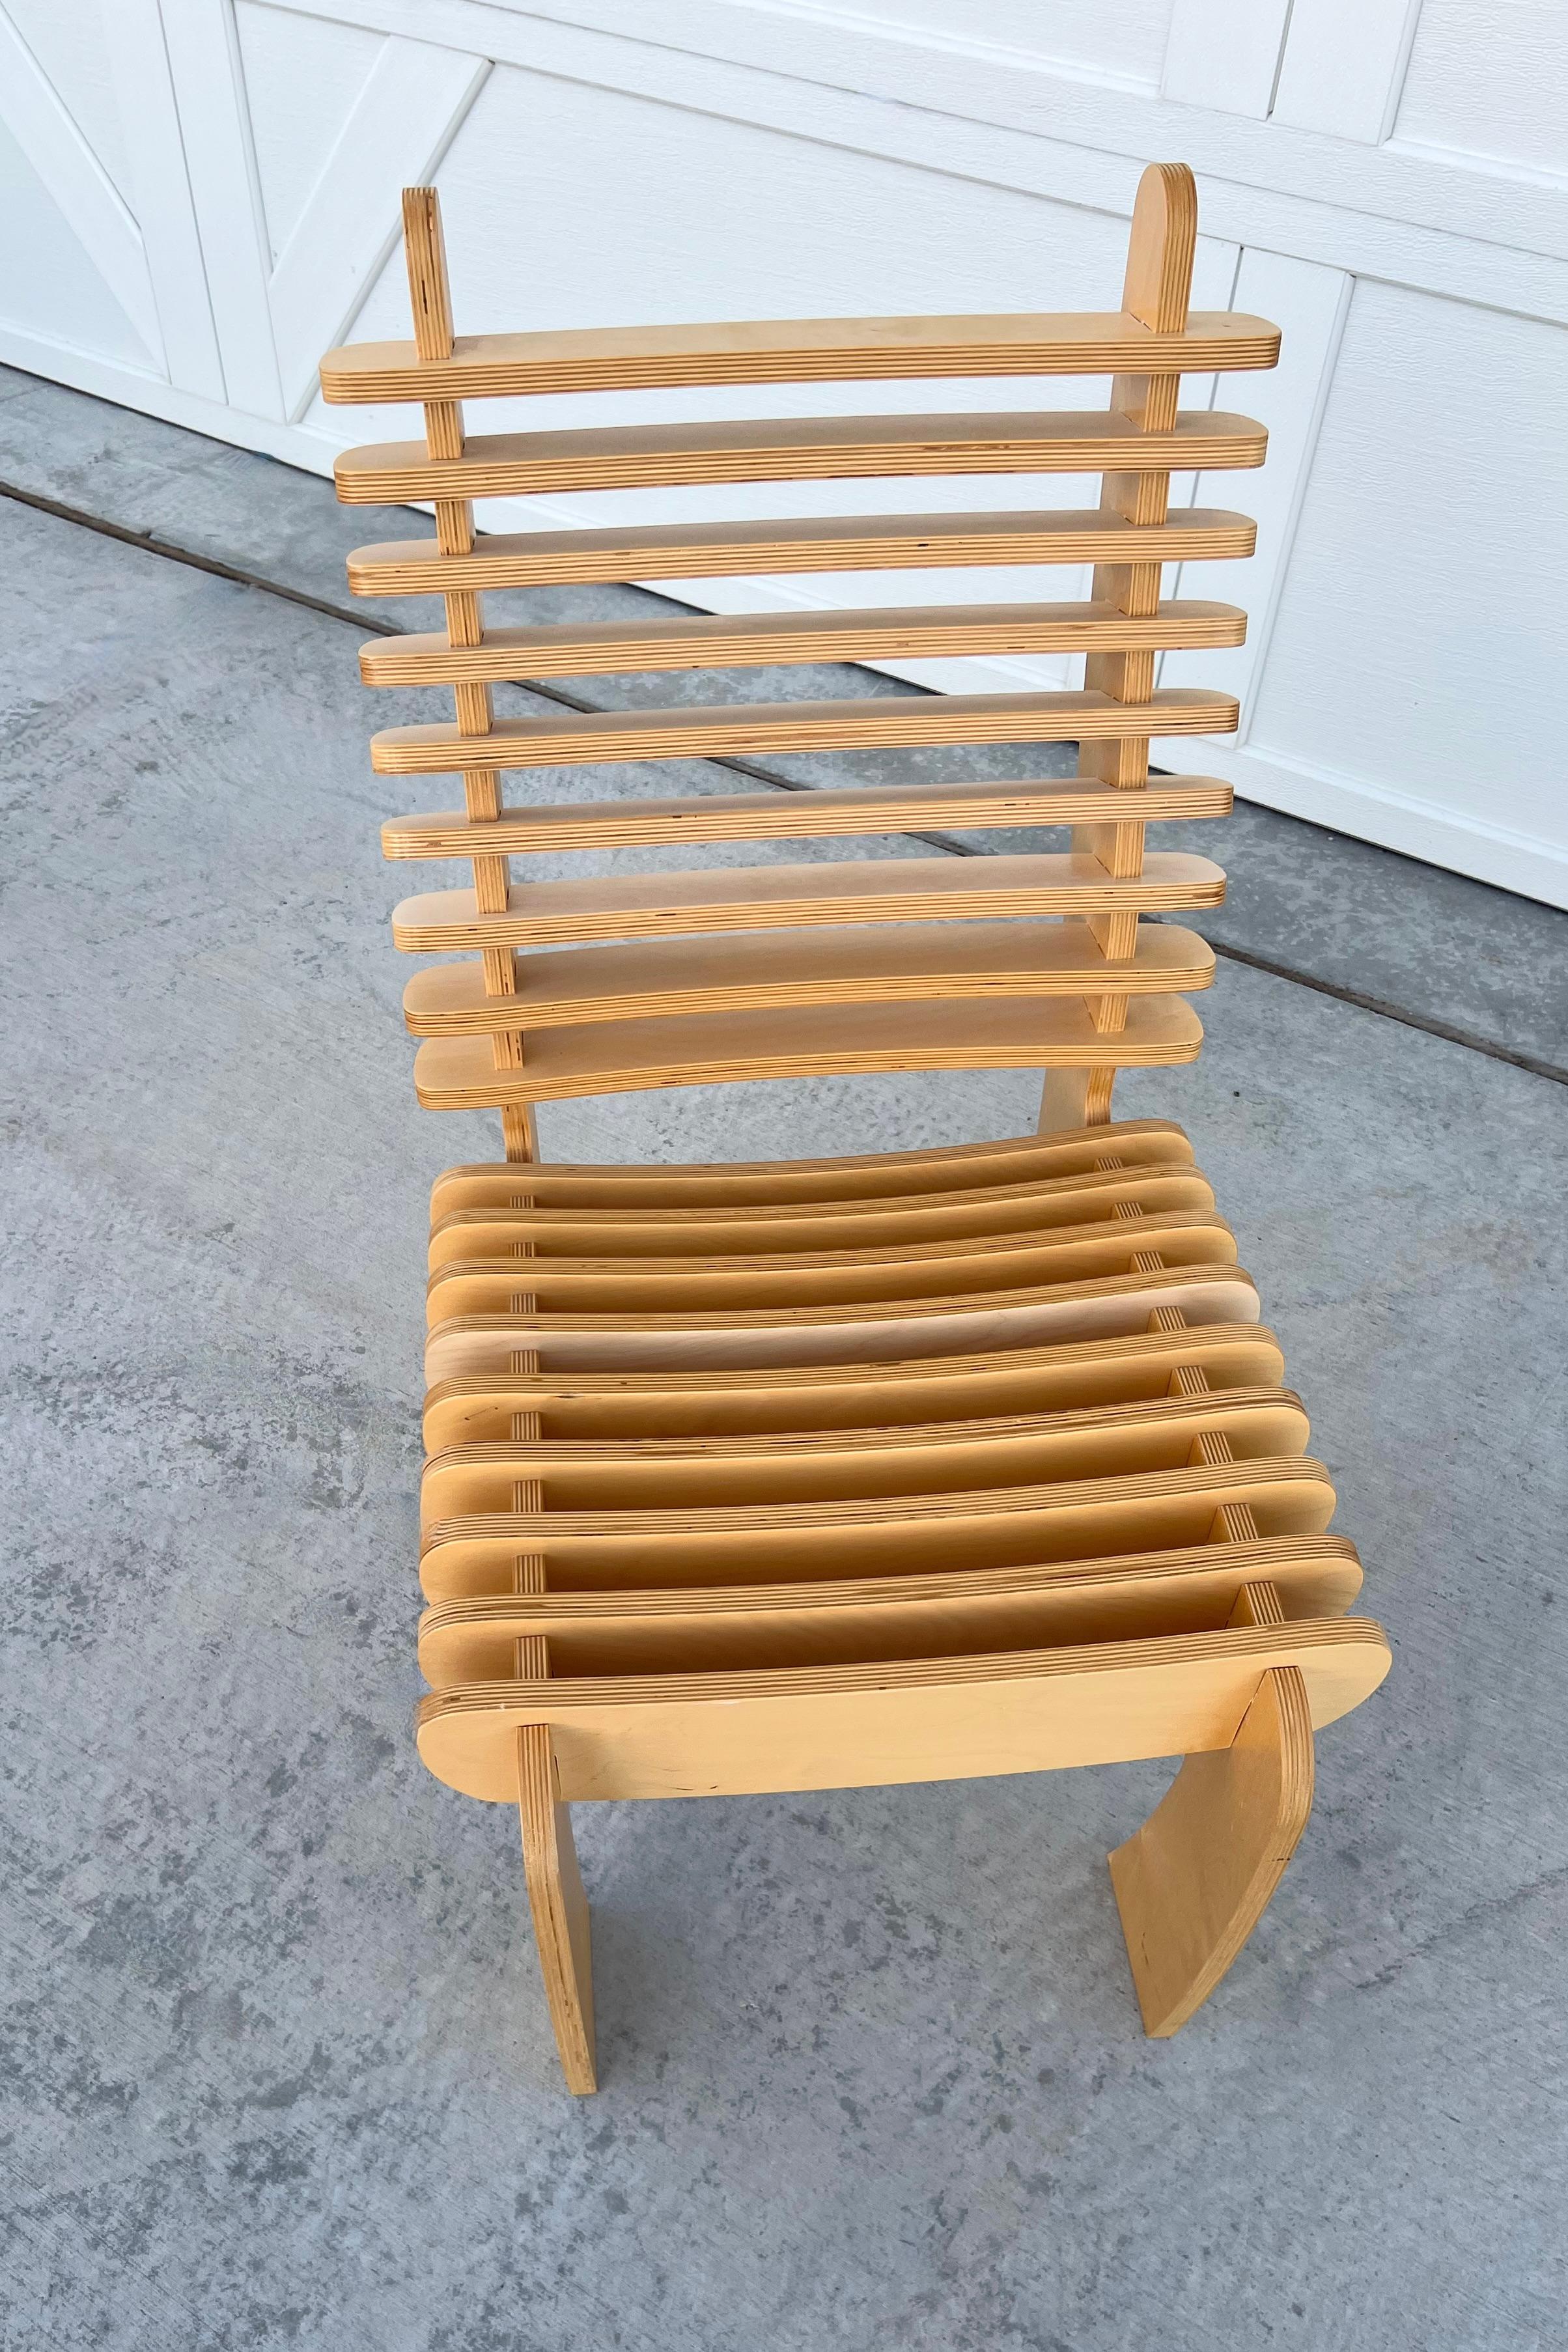 Contemporary Modern Blond Plywood Minimalist Slat Side Chair Art Architectural Piece For Sale